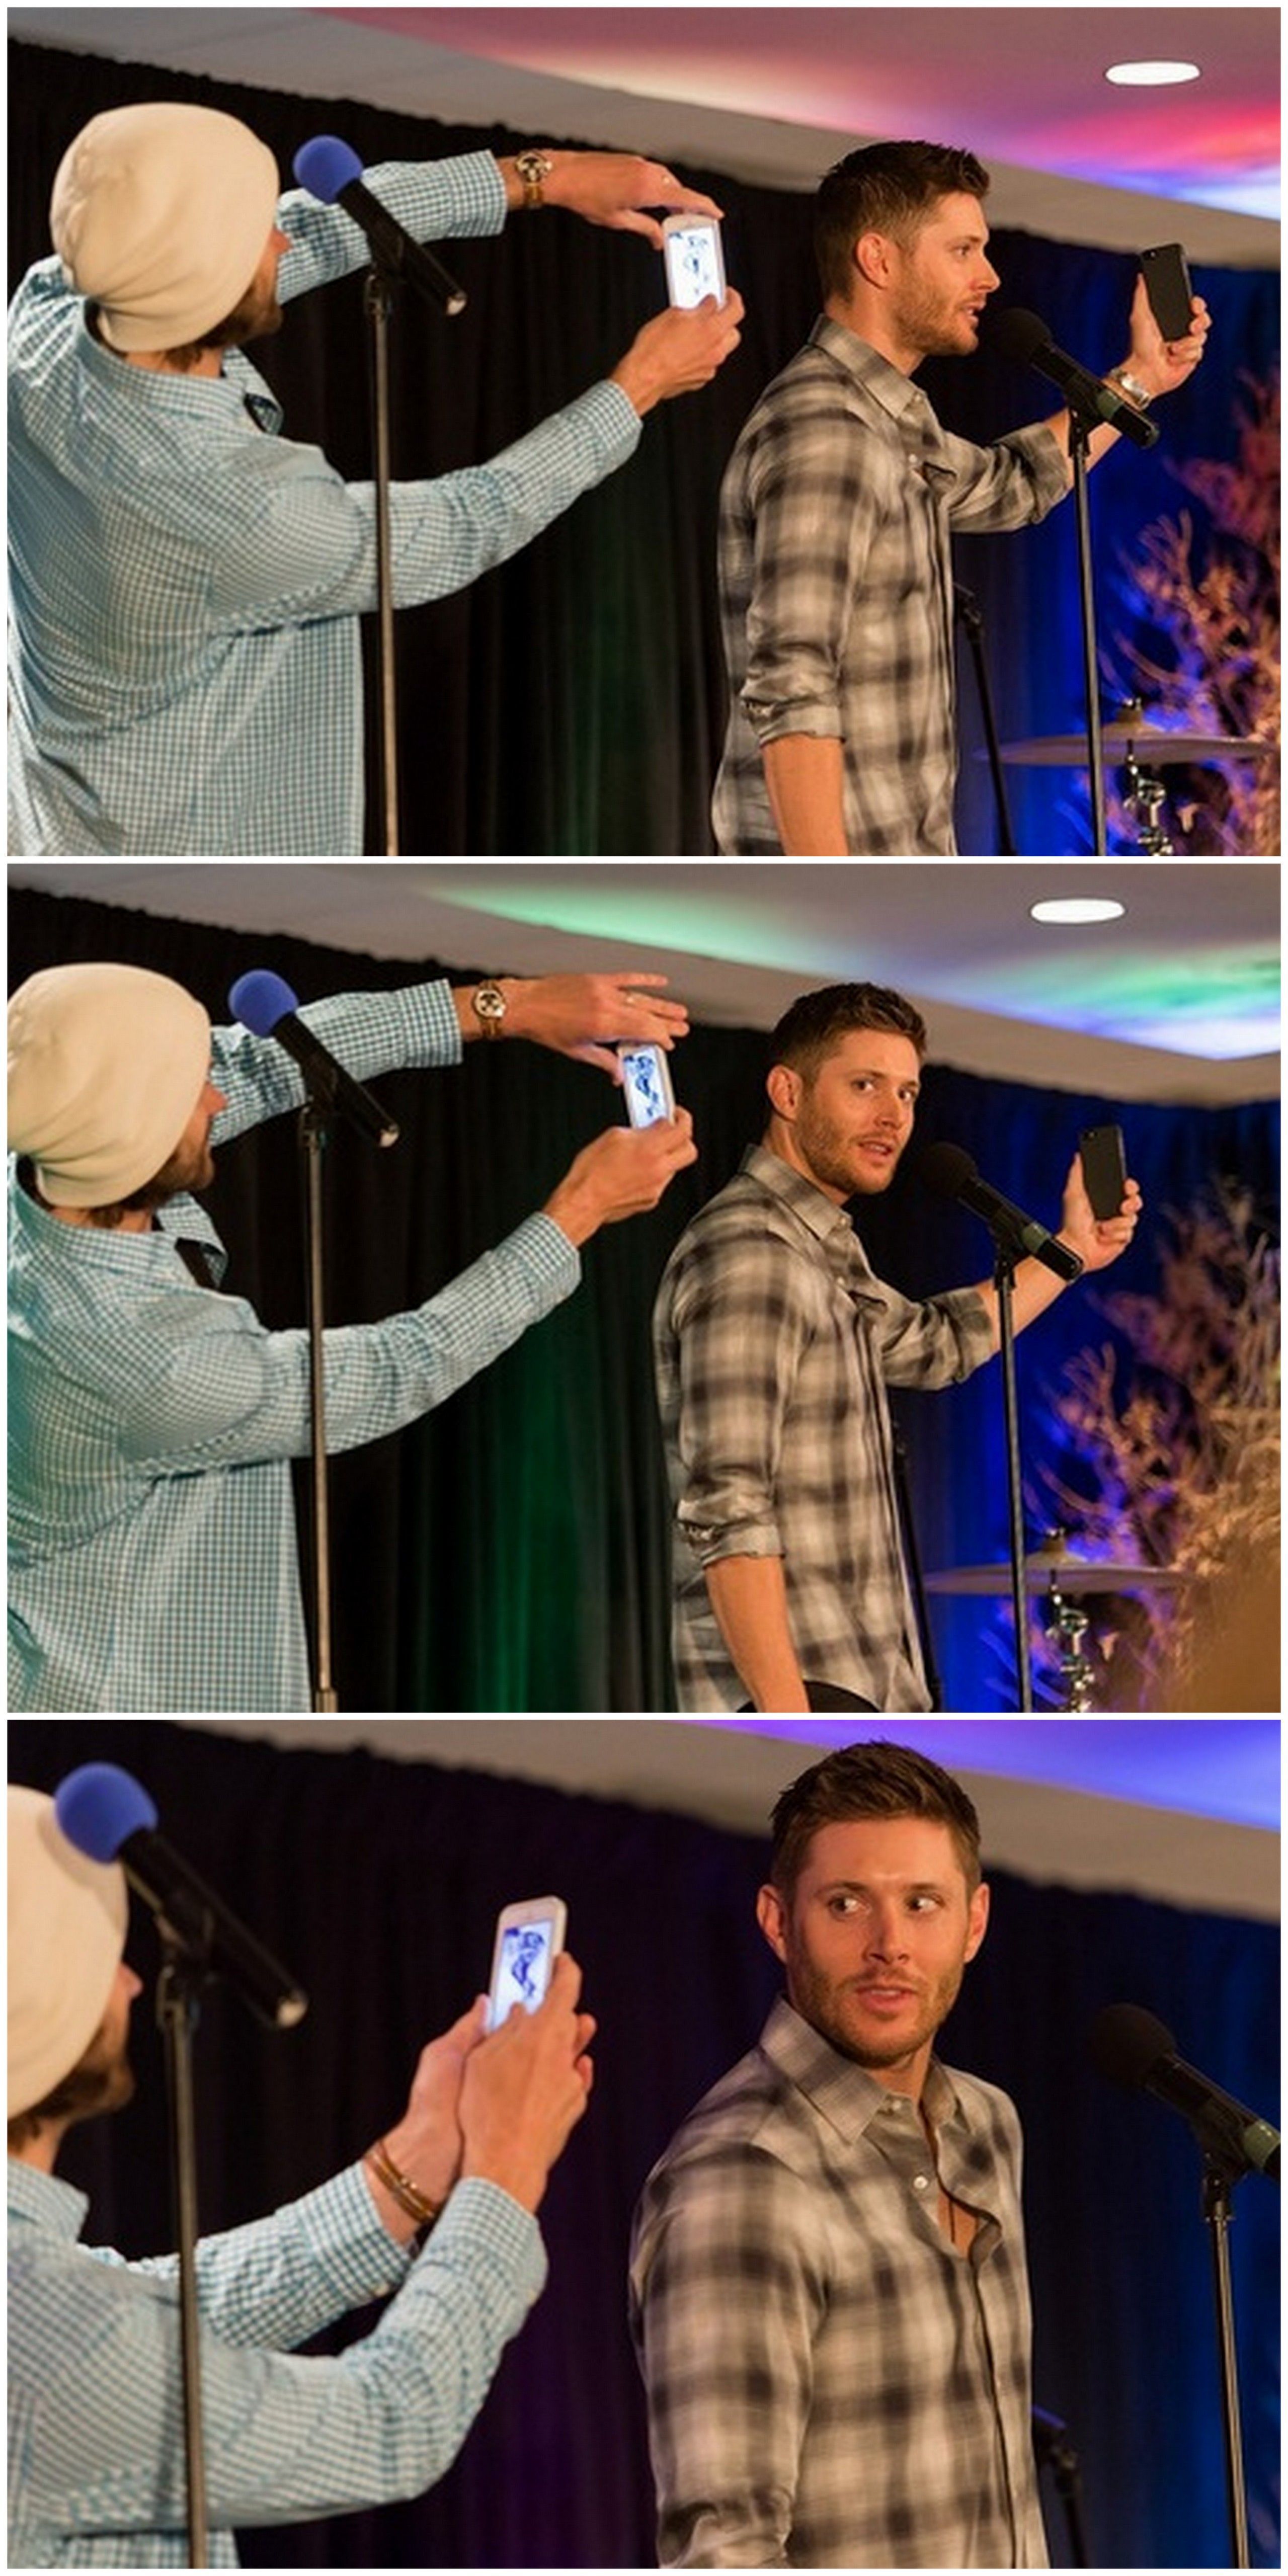 I feel like Jared probably has so many pictures of Jensen with that expression :)